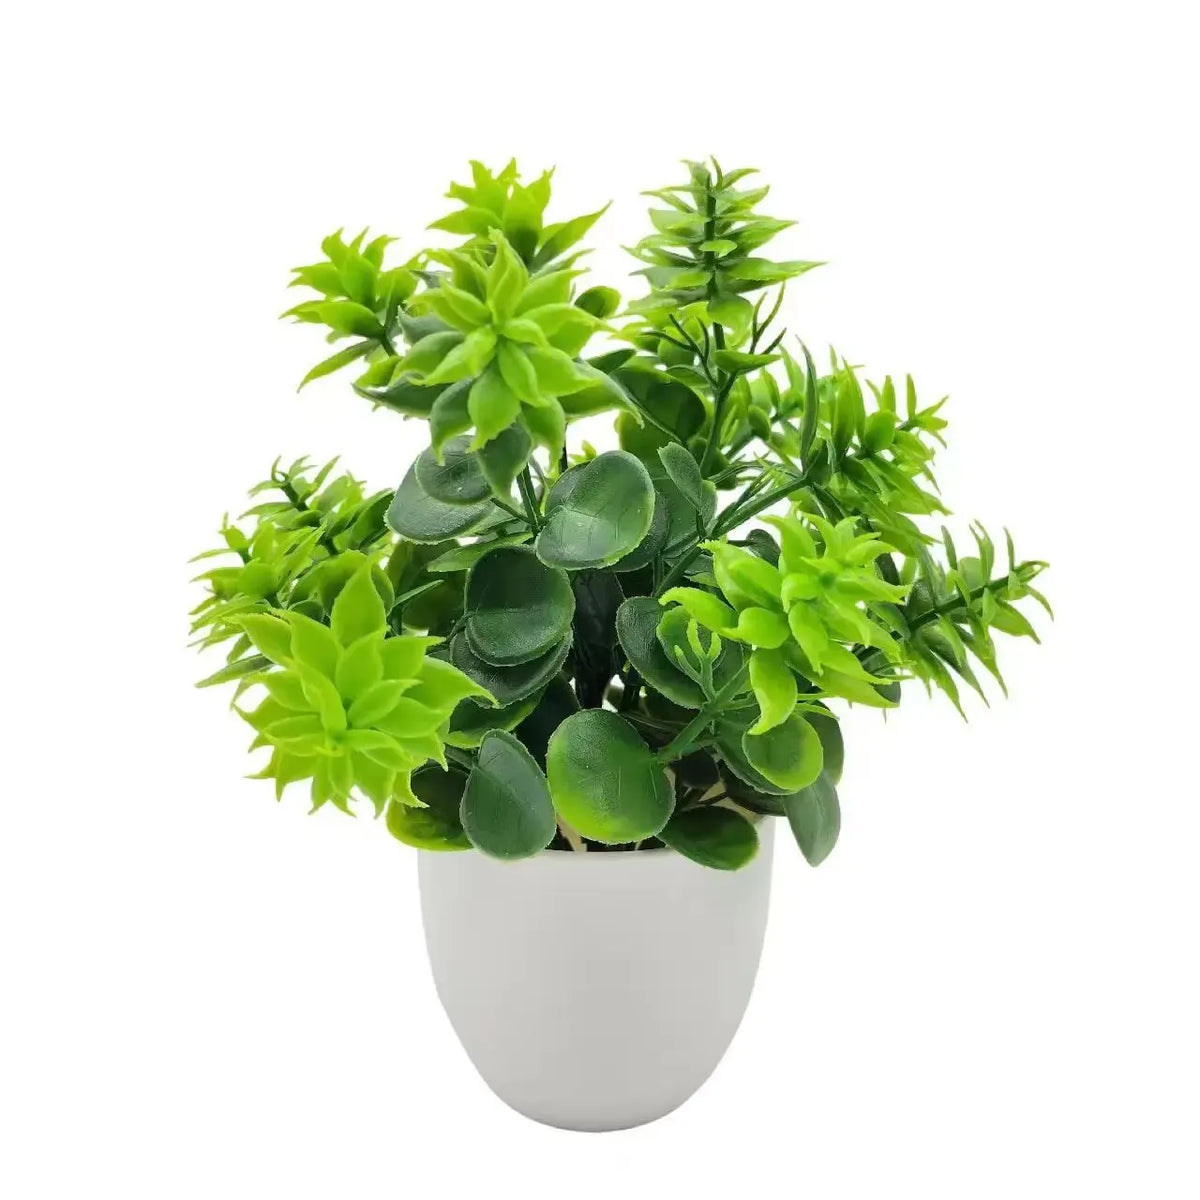 Cross-border Hot Sale New Artificial Plant Fake Plant Green Plant Indoor and Outdoor Decoration Plastic Potted Spring